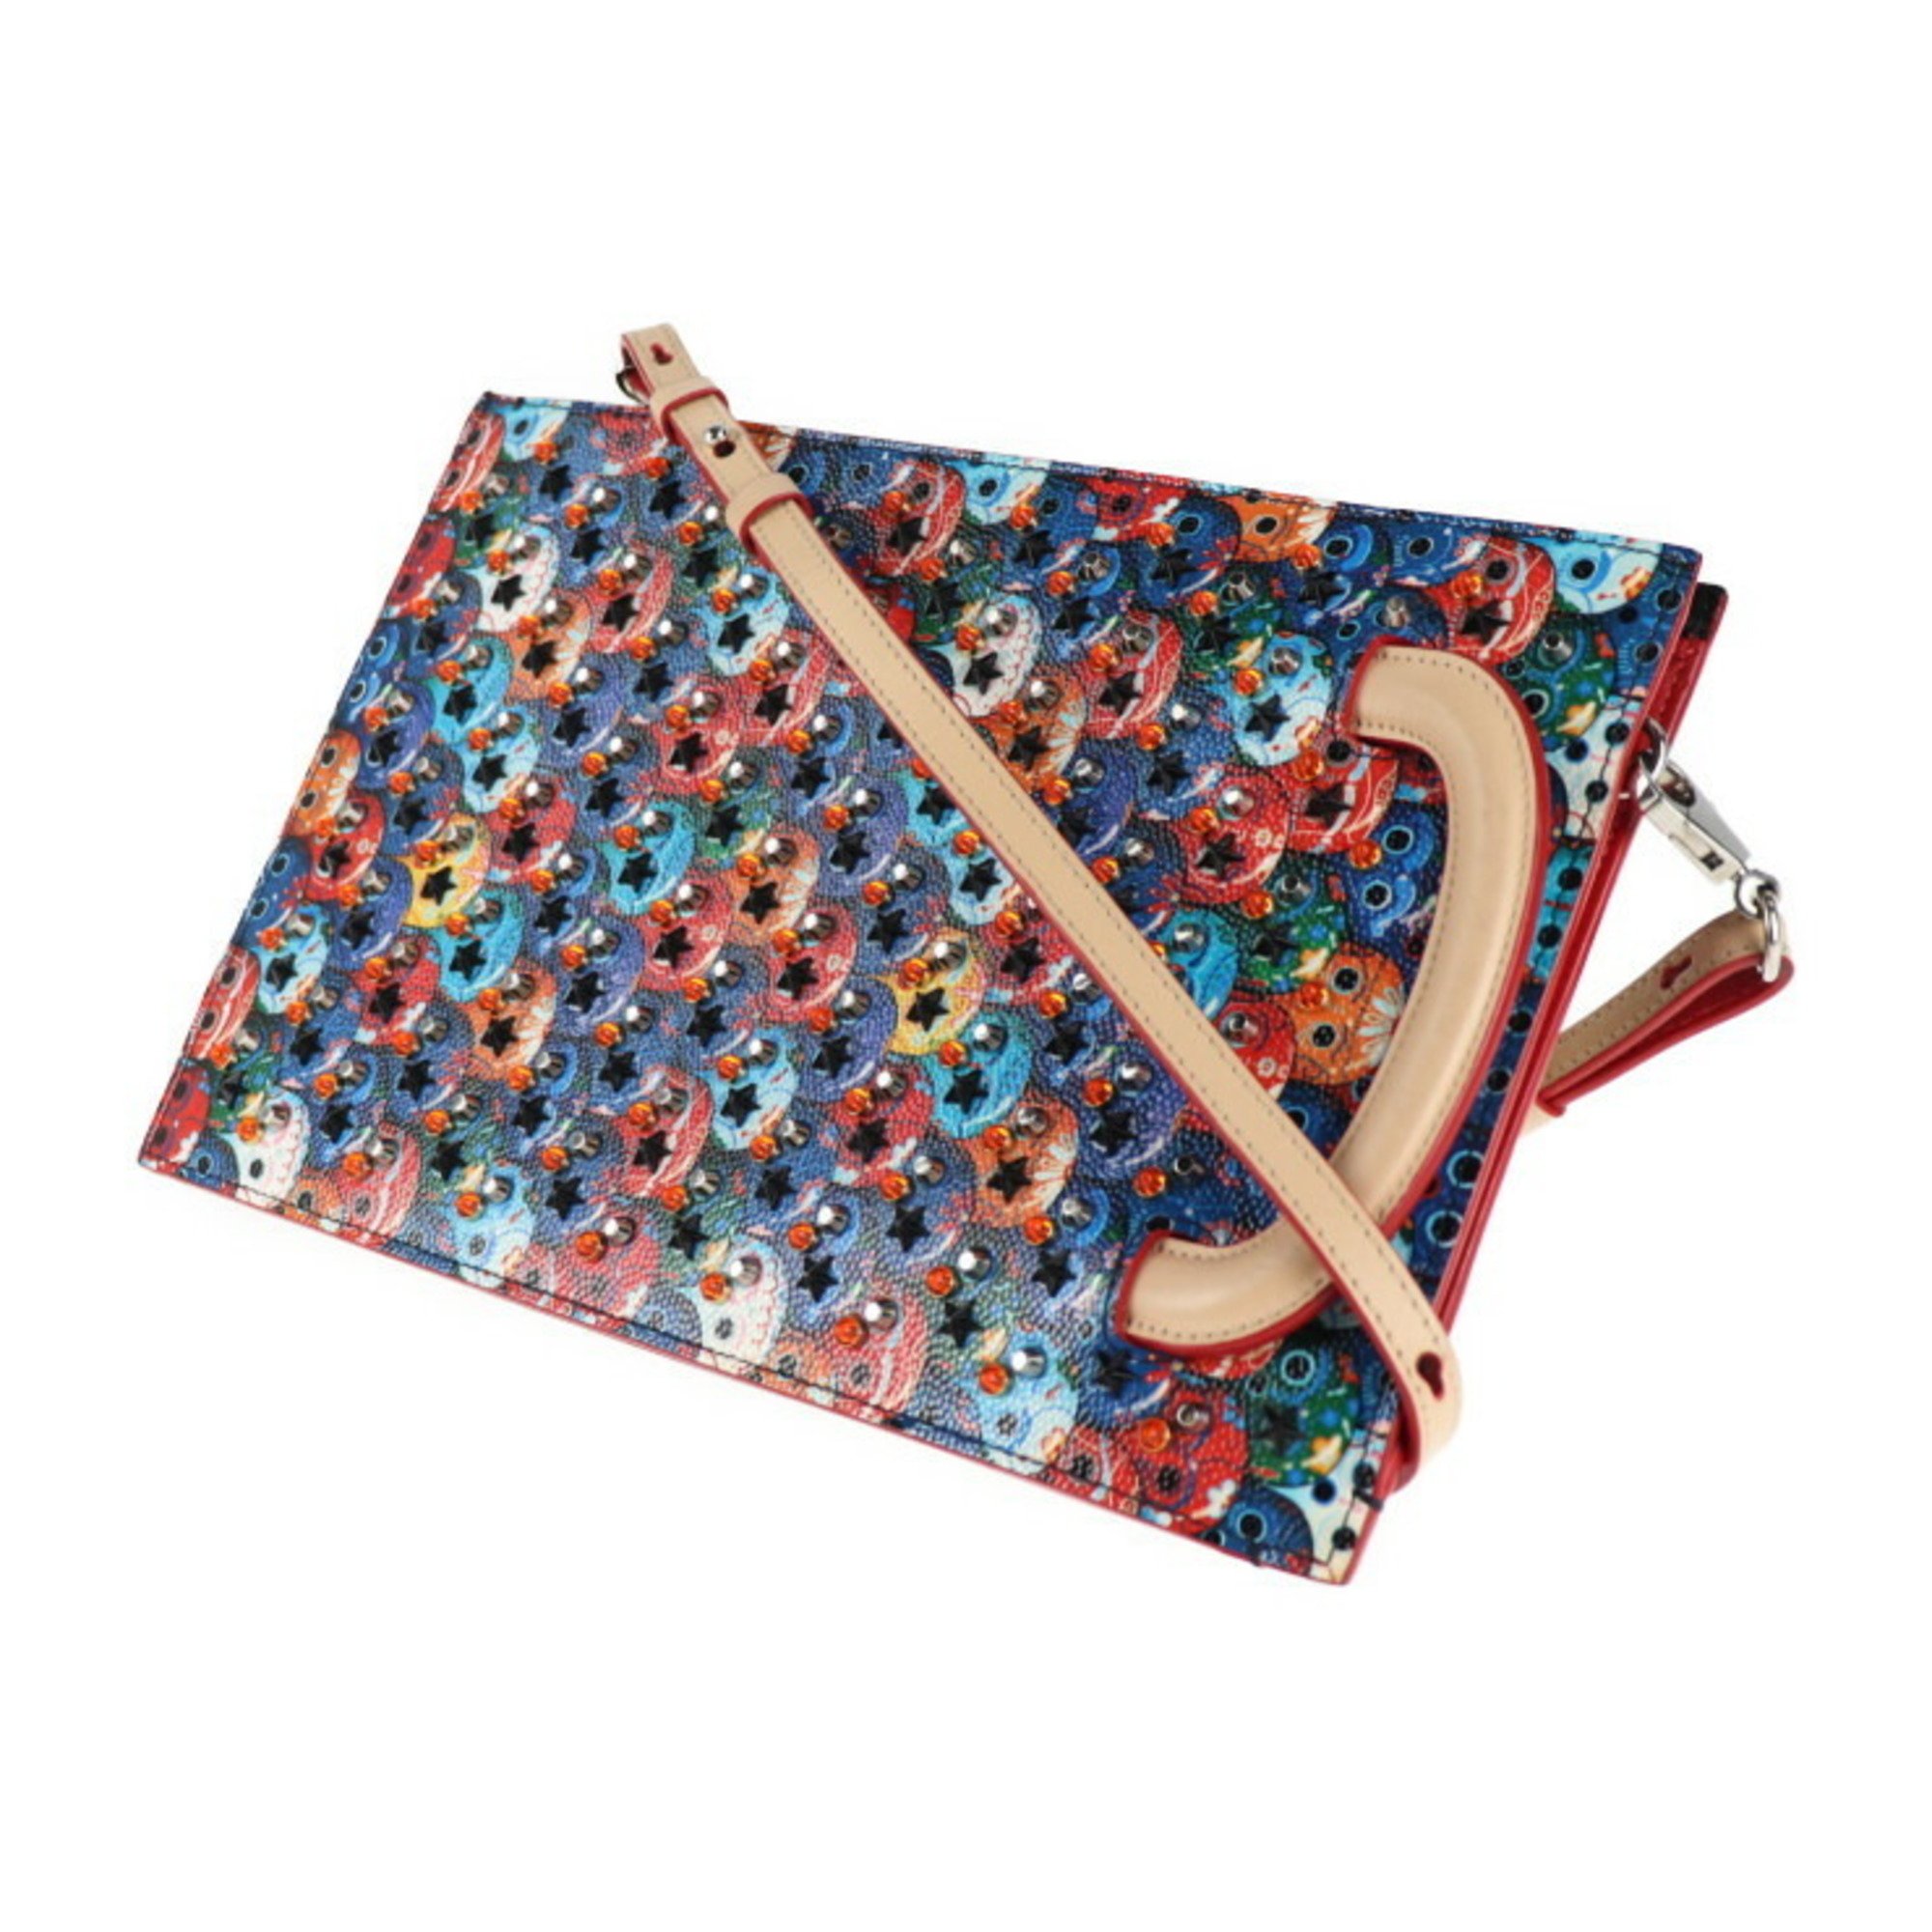 Christian Louboutin Trick Track Small Portfolio Clutch Bag 3175108 Leather Multicolor Skull 3WAY 2WAY Shoulder